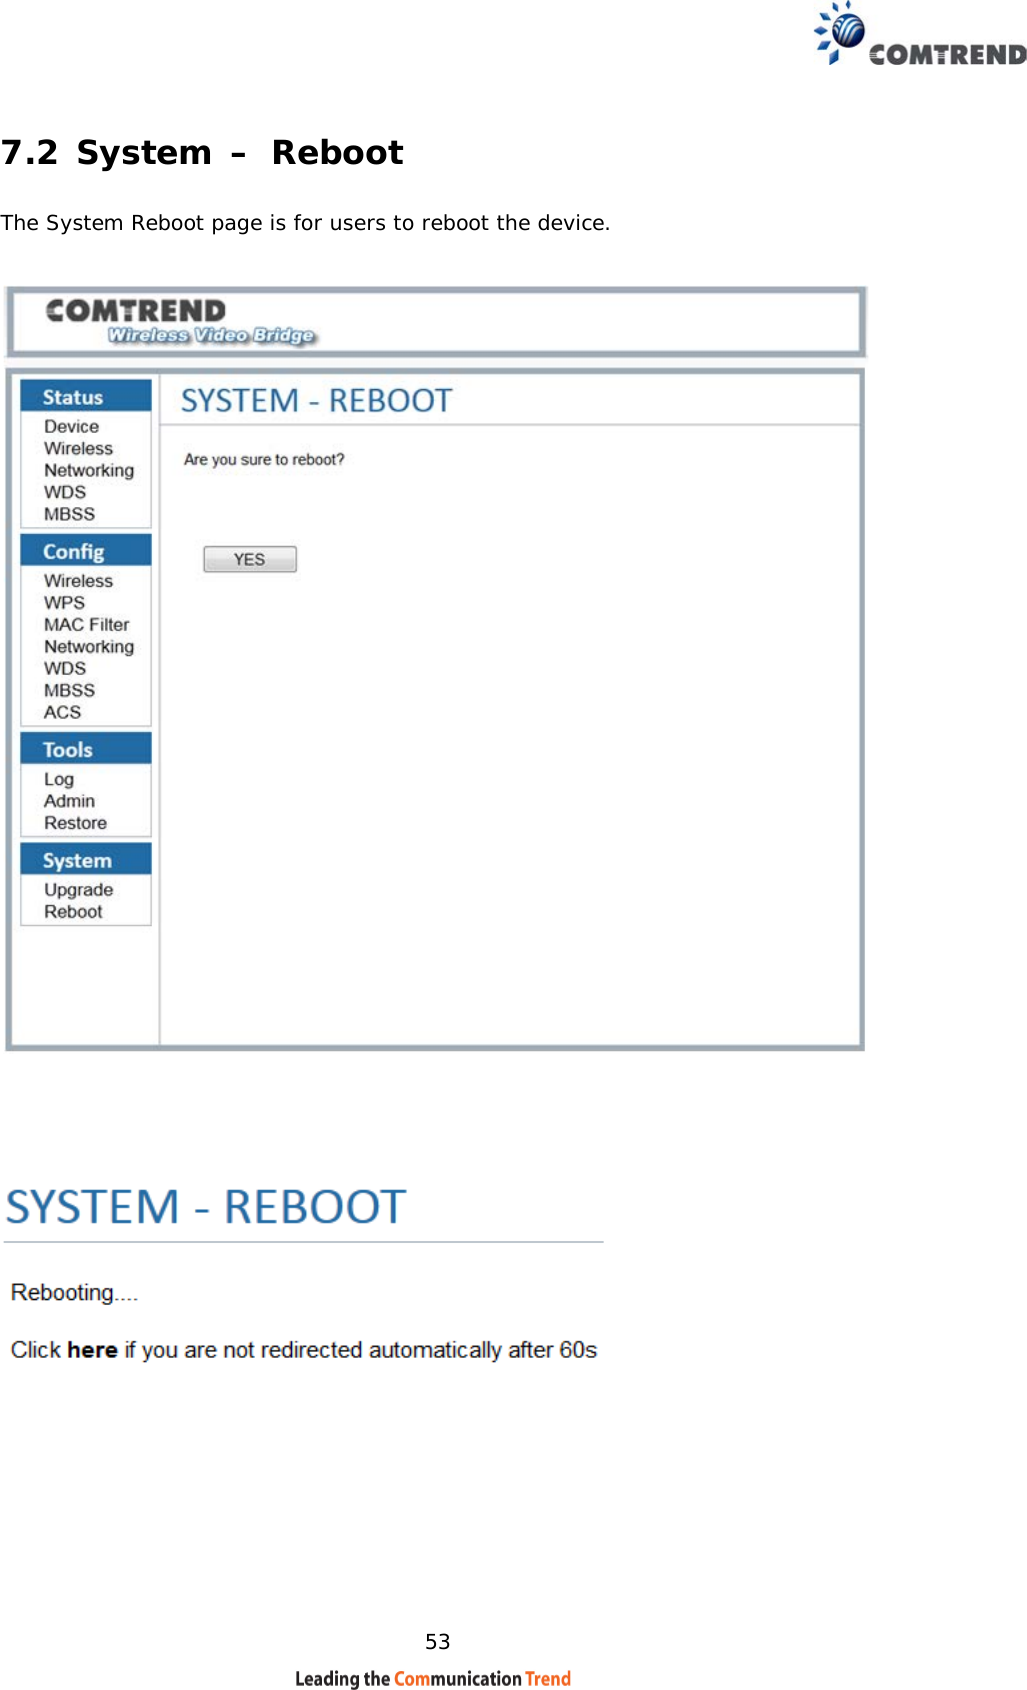    53 7.2 System – Reboot The System Reboot page is for users to reboot the device.           